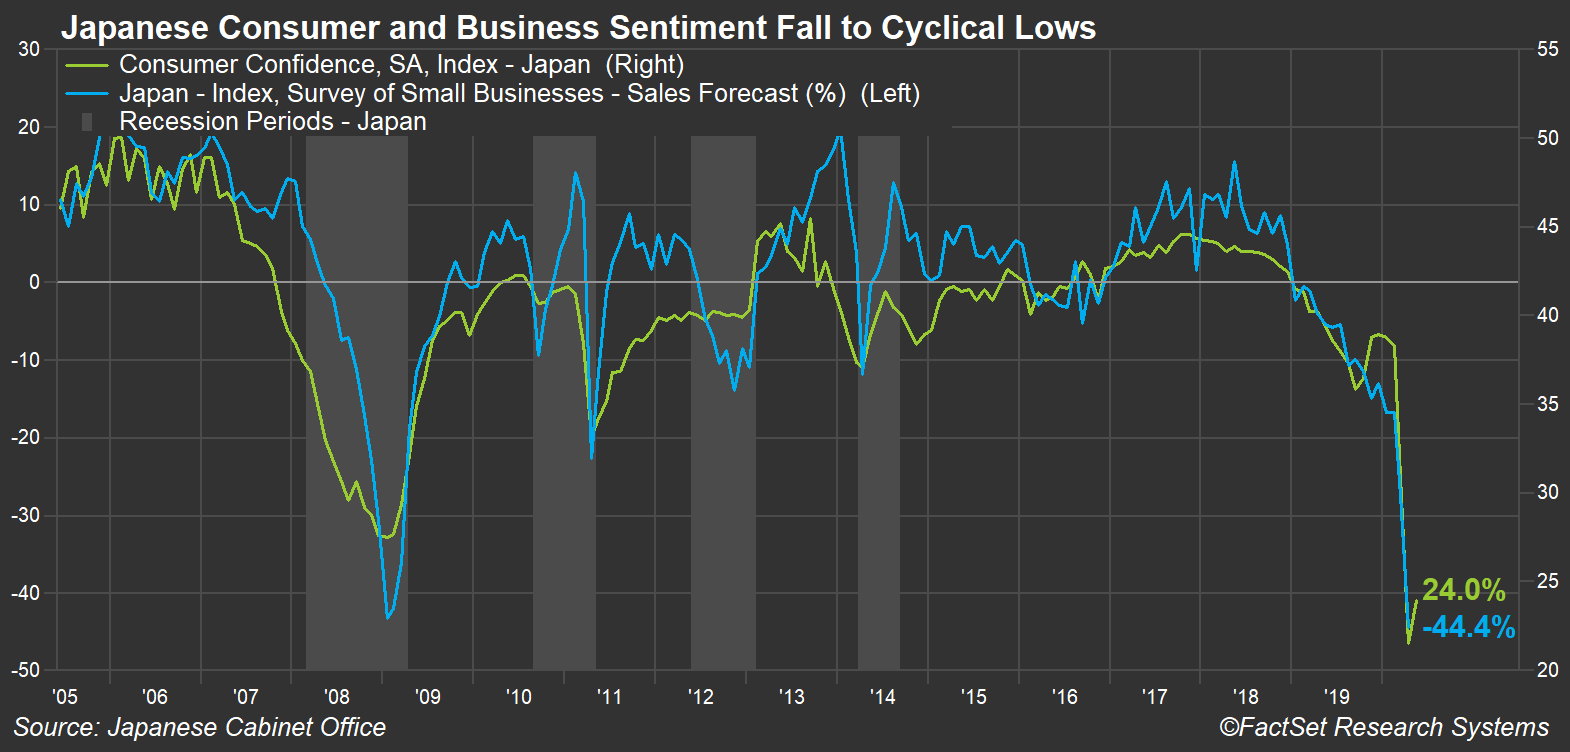 Japan Consumer and Business Sentiment